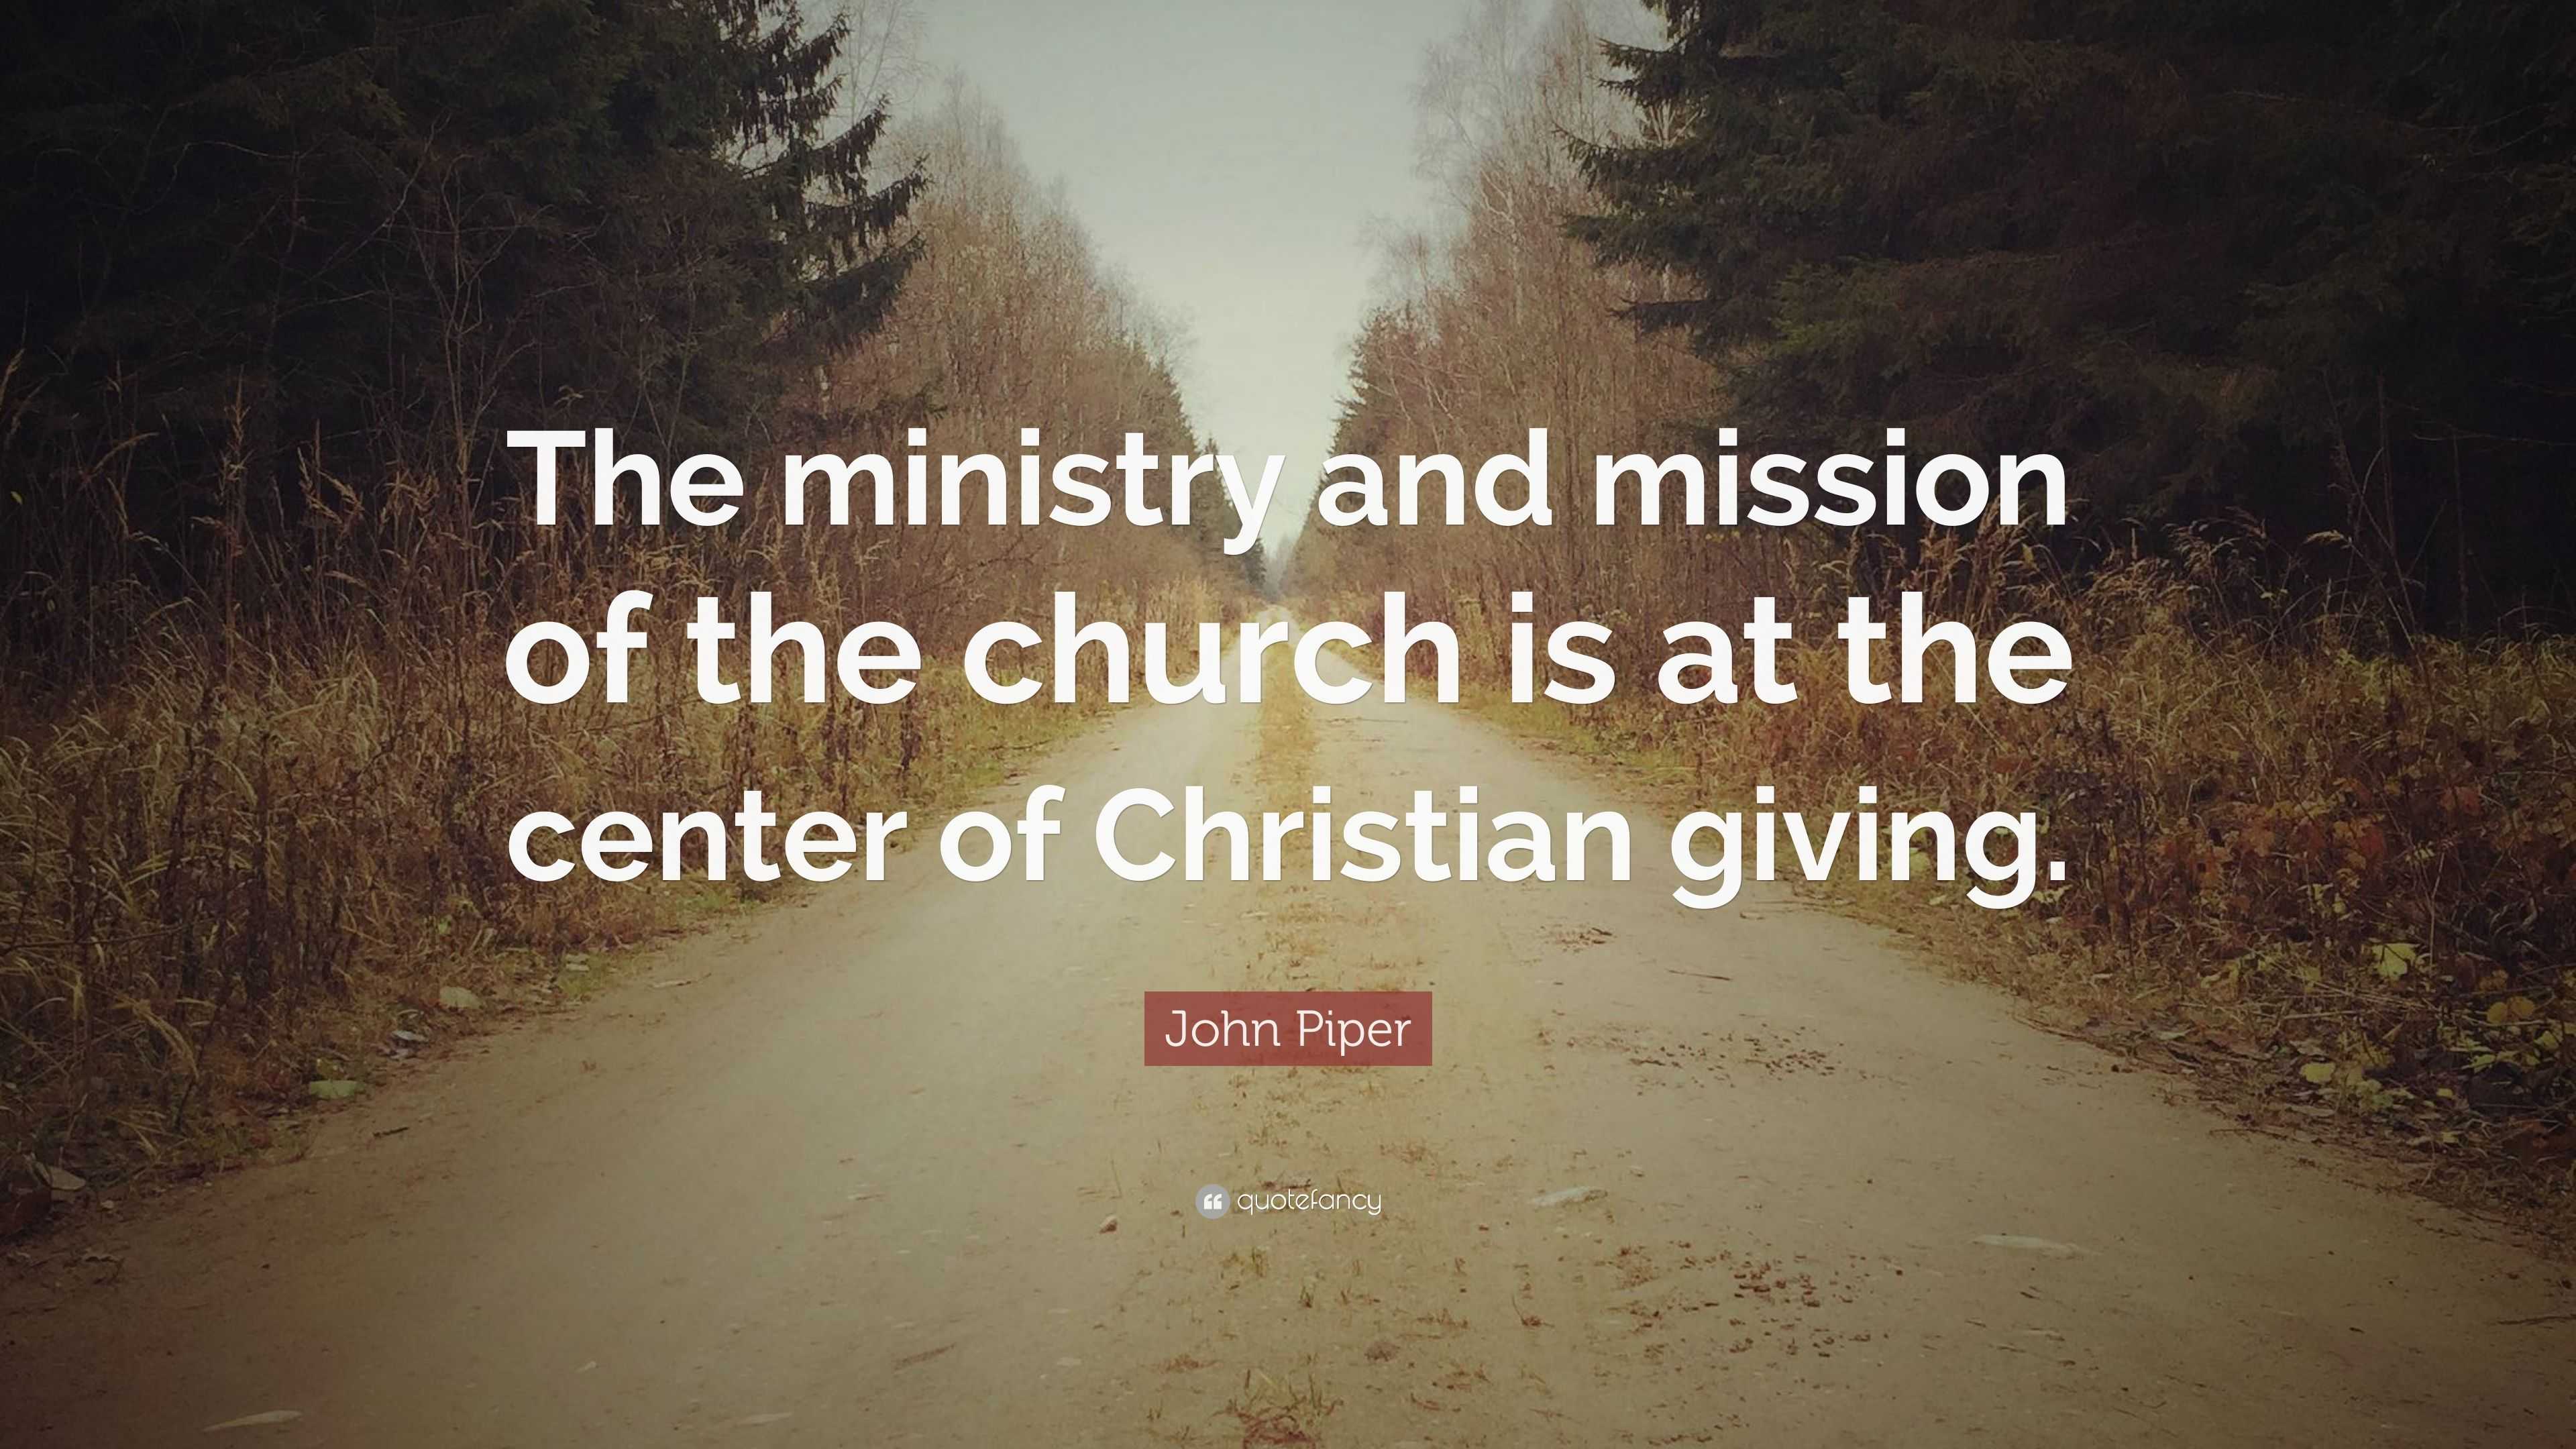 John Piper Quote “The ministry and mission of the church